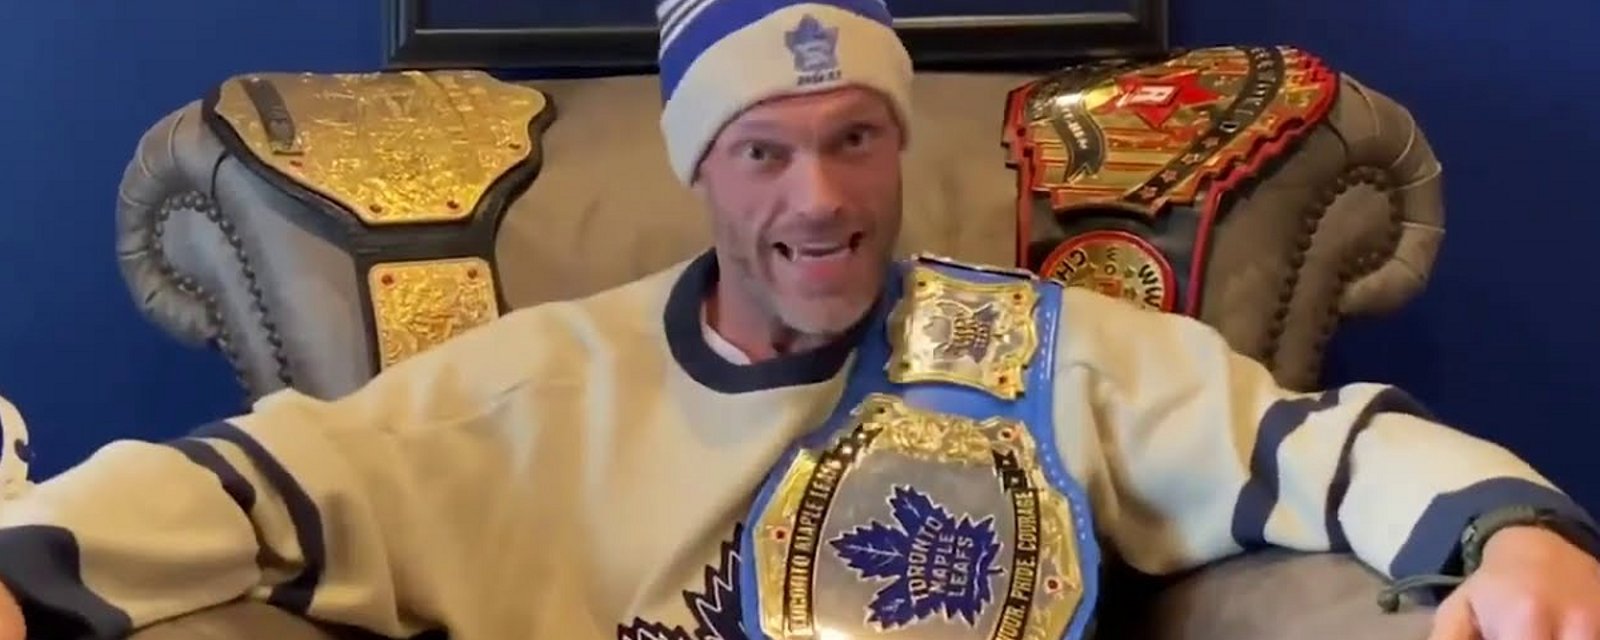 WWE superstar 'Edge' pays tribute to a former Maple Leaf.